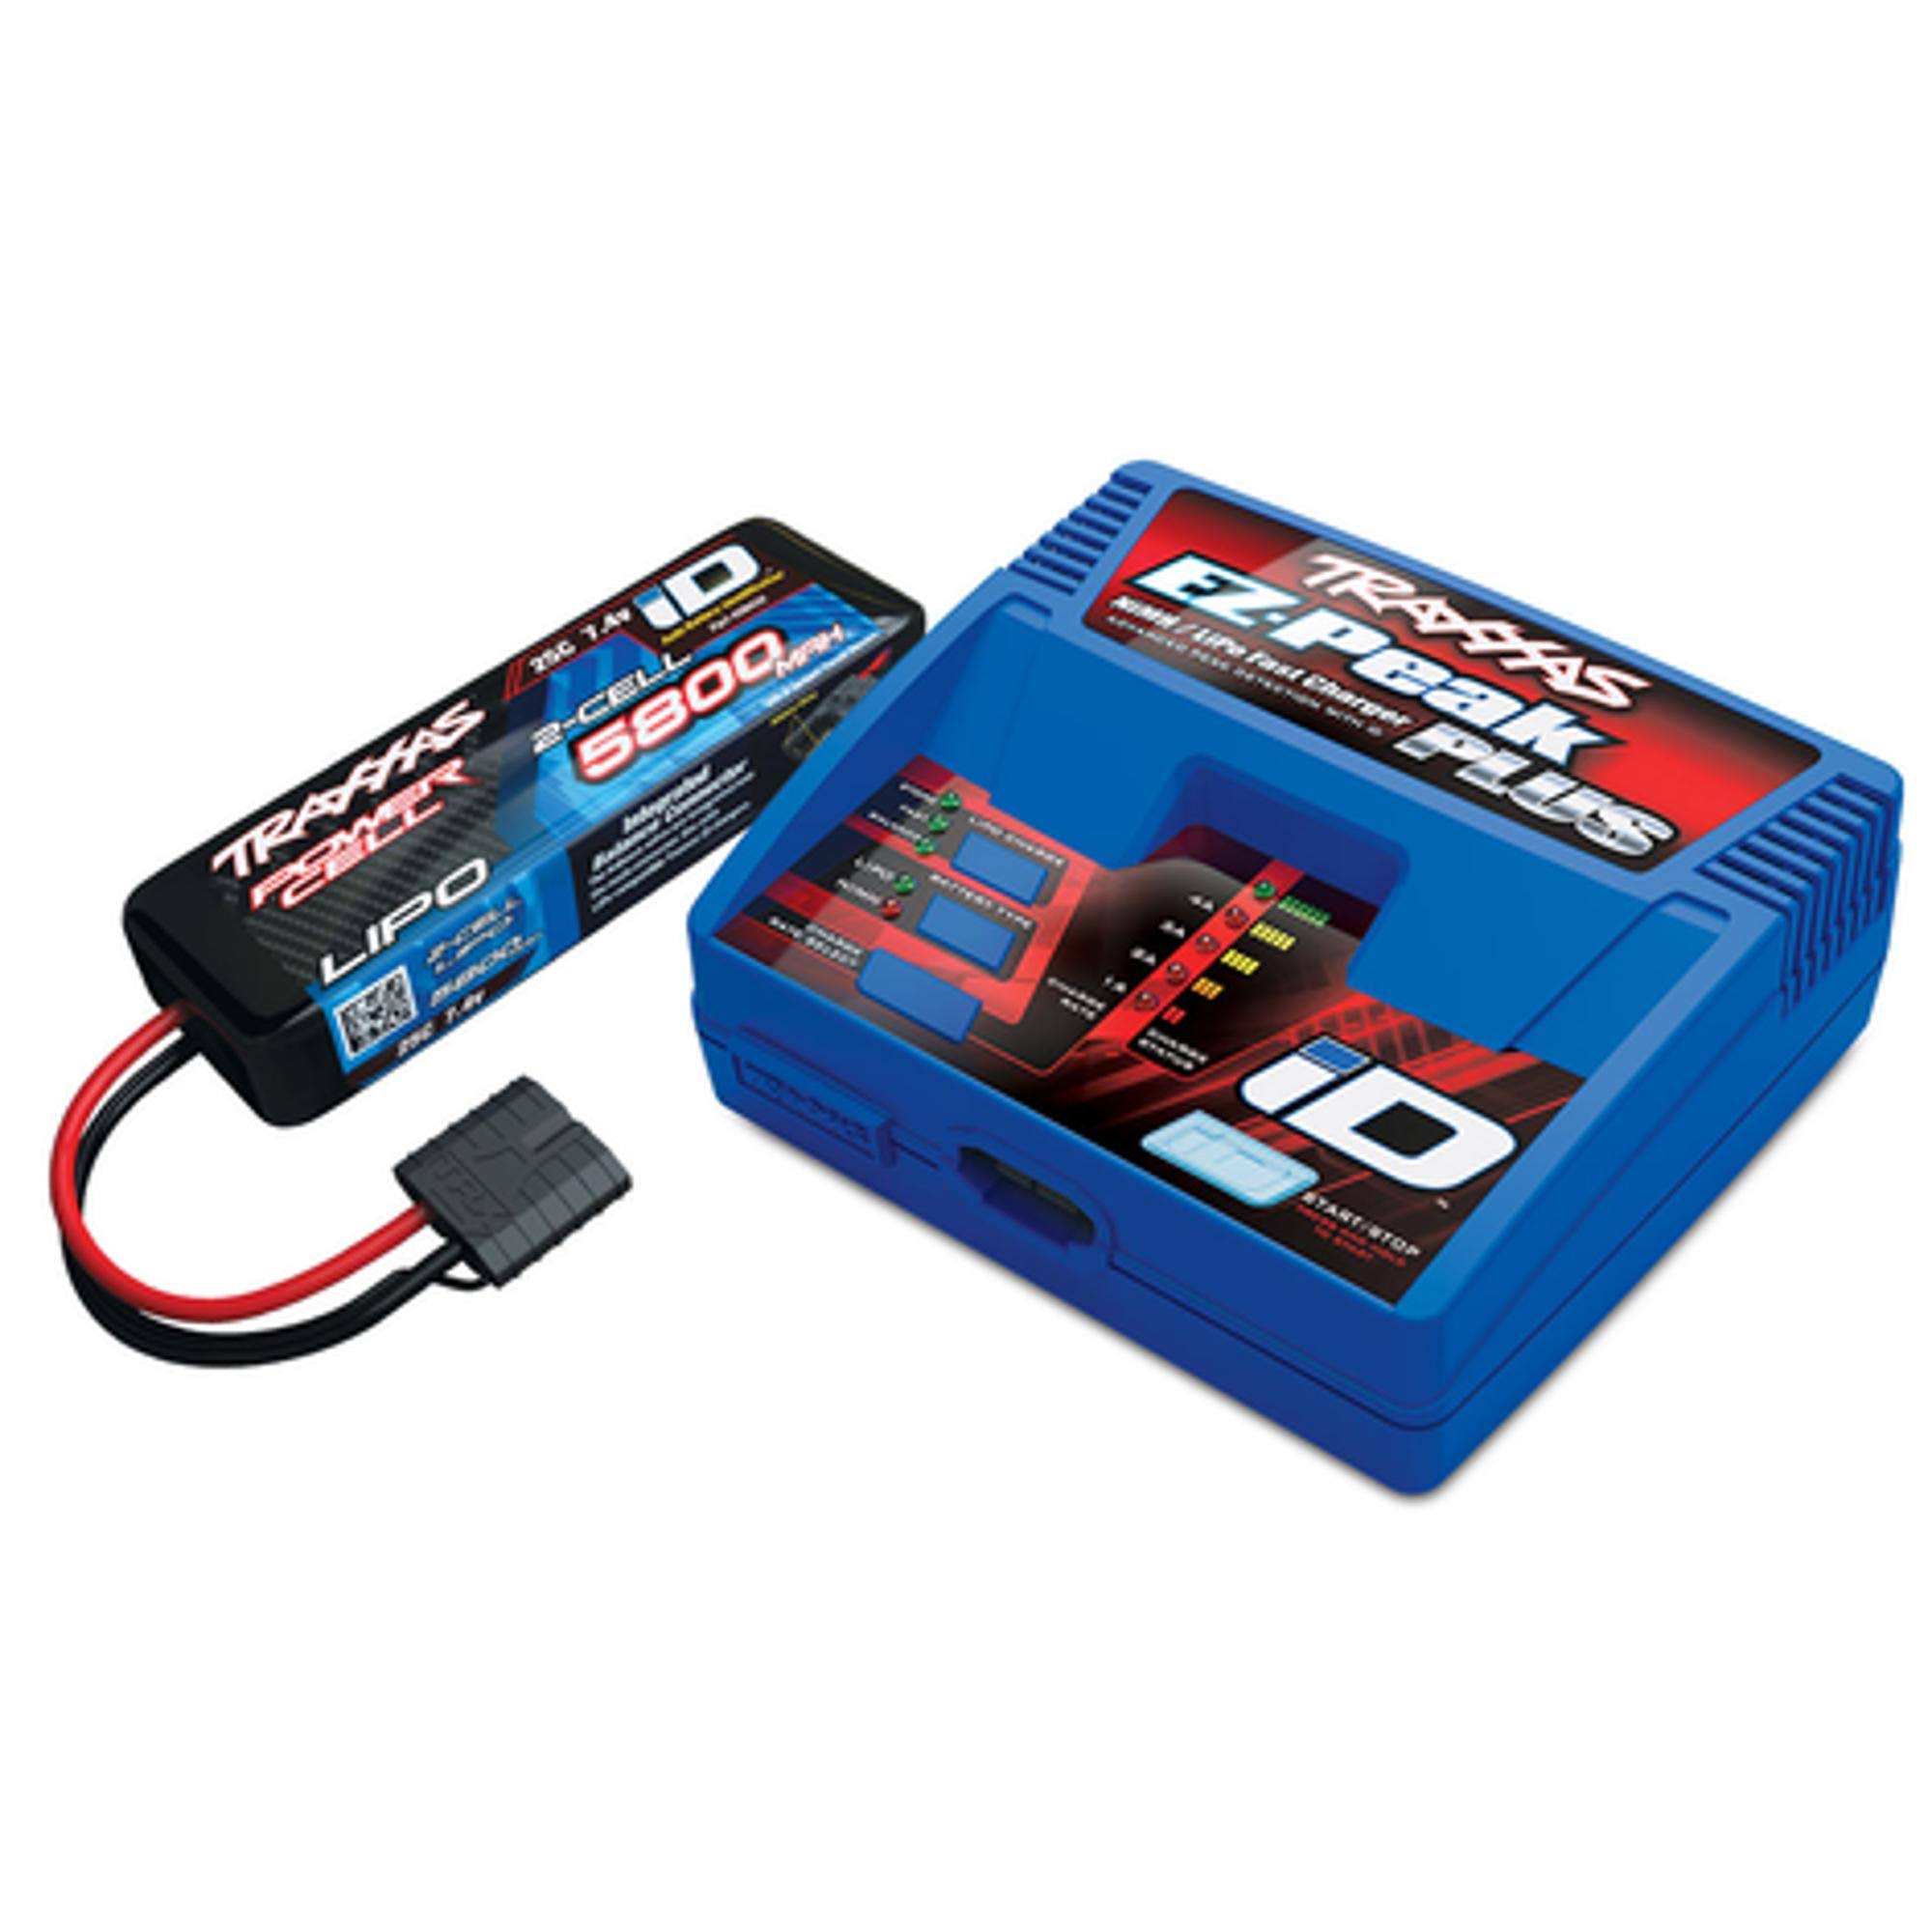 Traxxas iD Charger with 2S 2-Cell LiPo Battery - 5800mAh, 25C, 7.4V